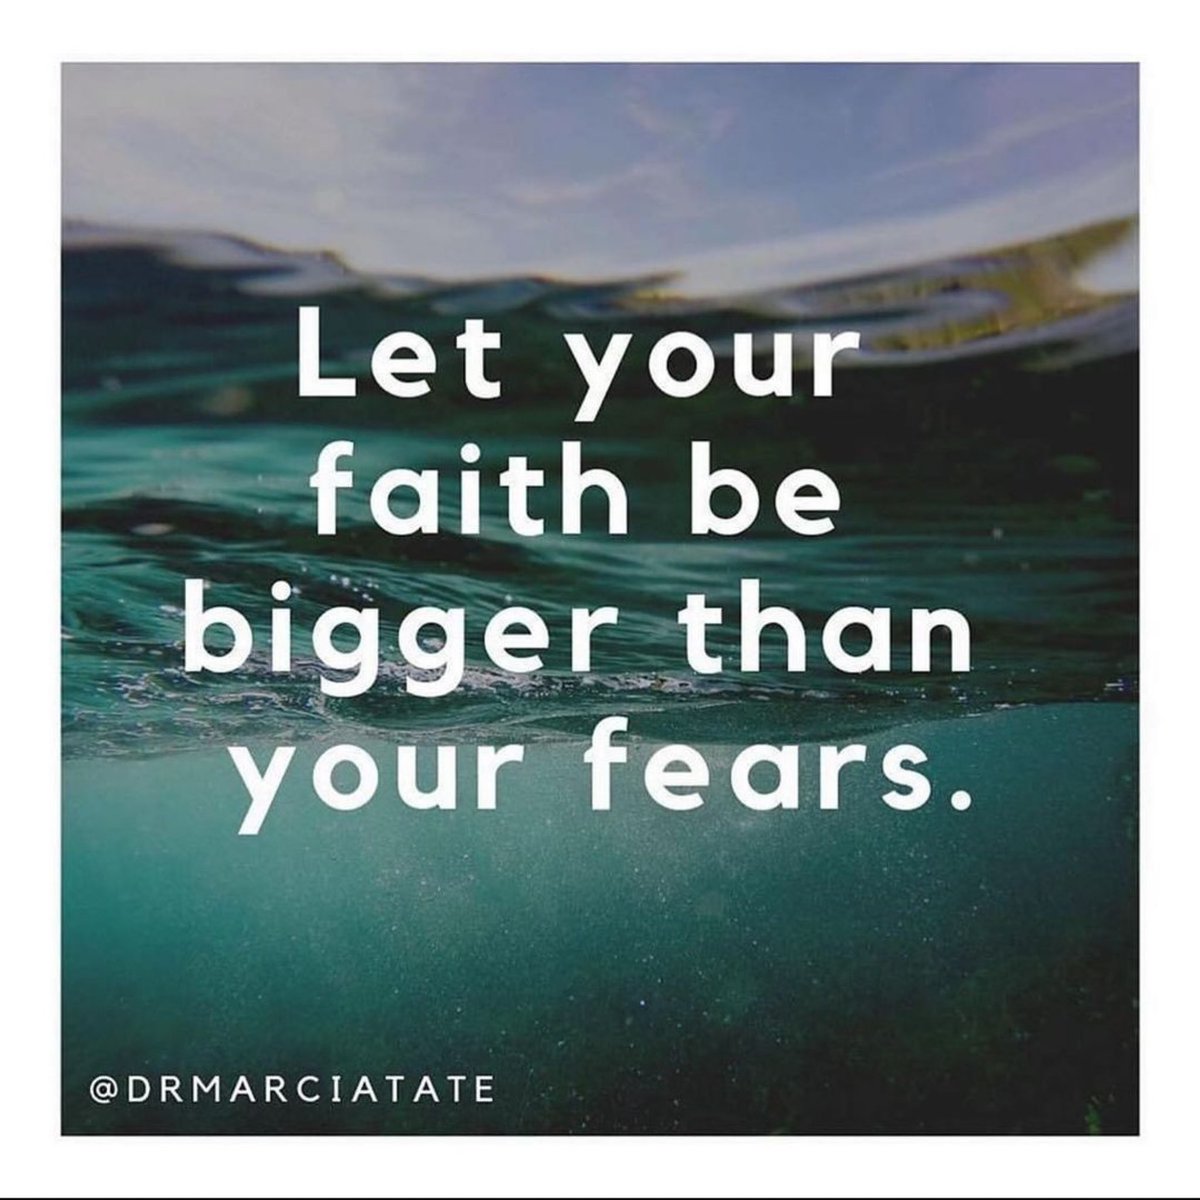 Remember to feed your faith—in yourself, in goodness, in hope—more than you feed your fears. #edchat